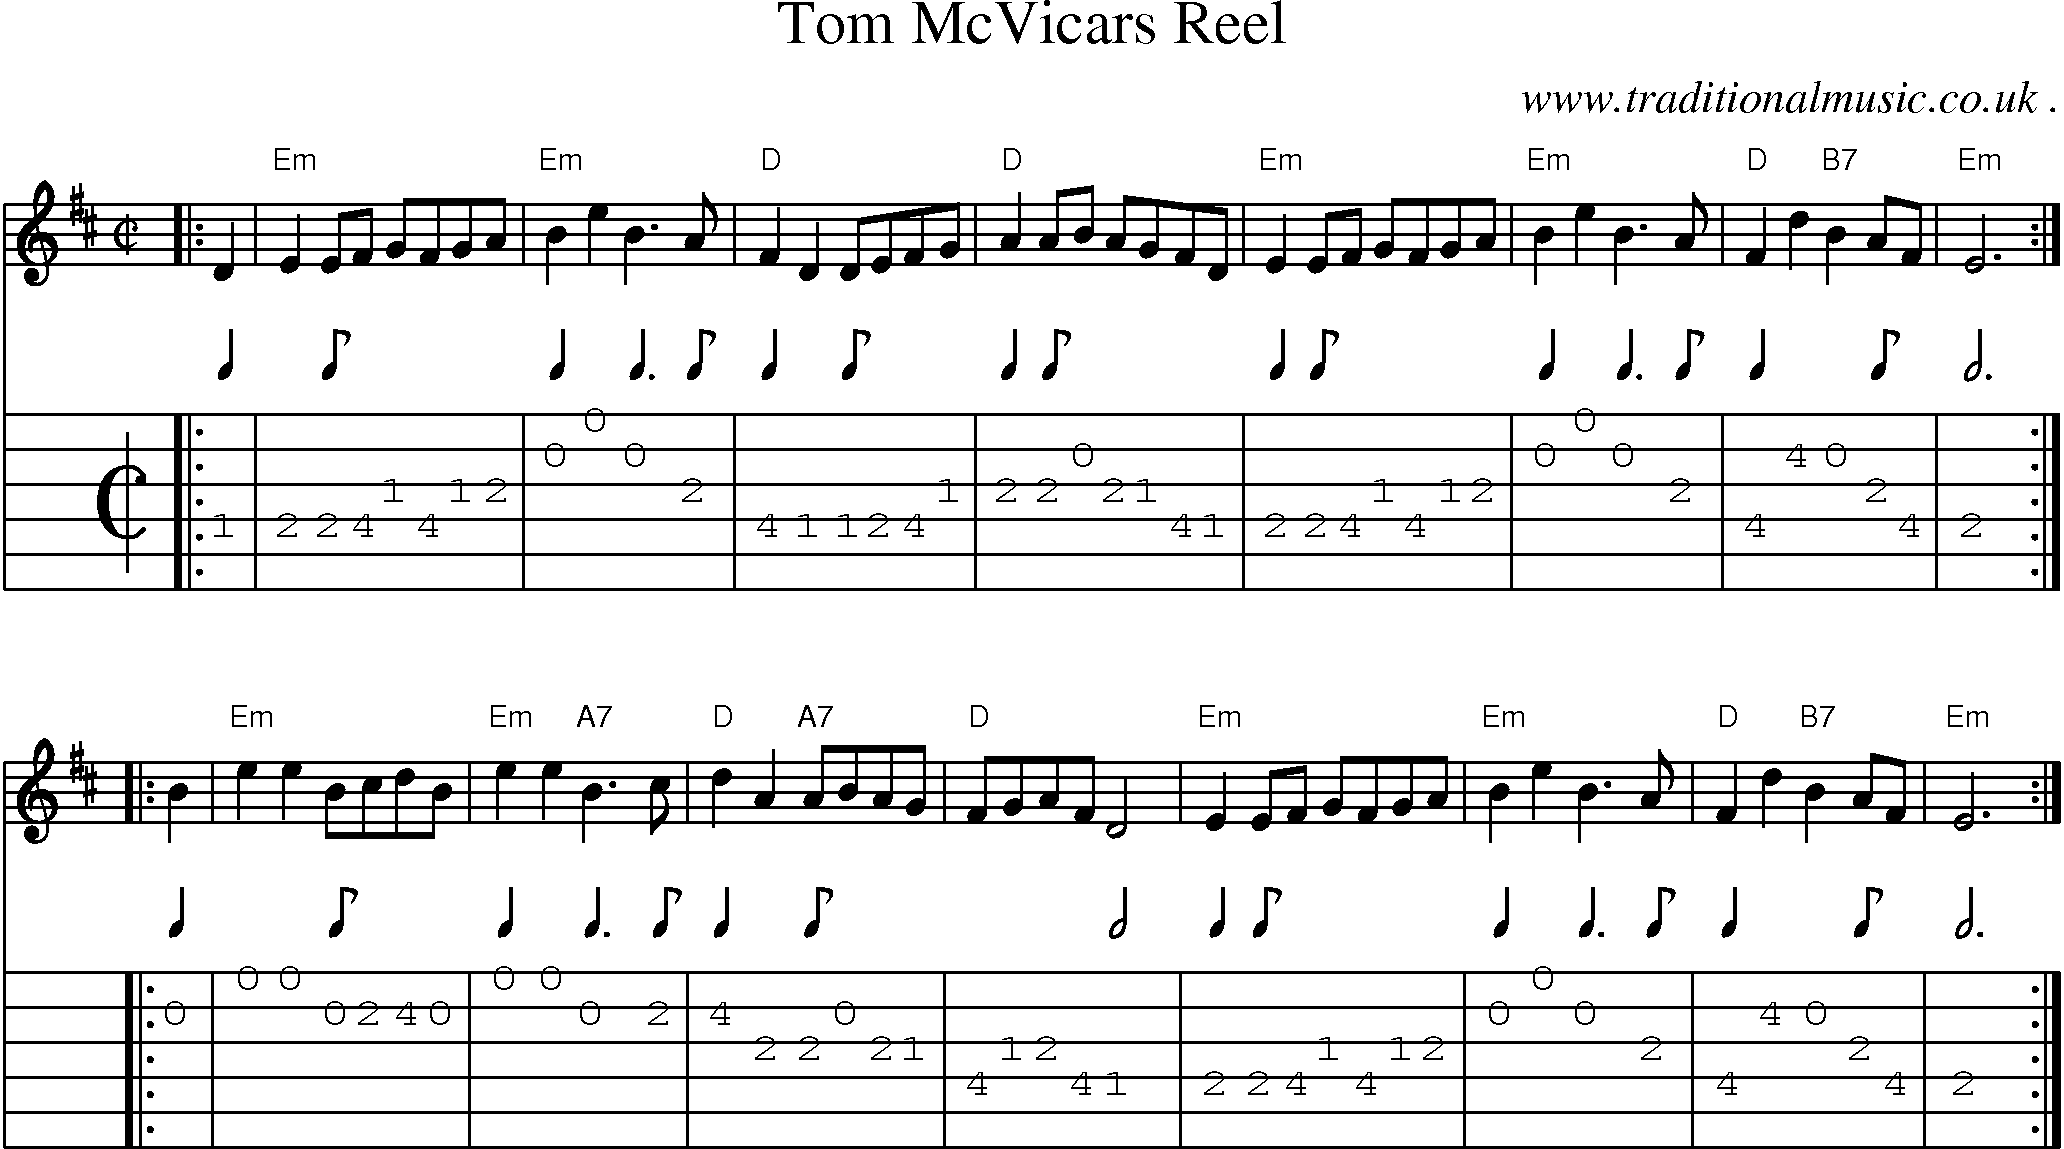 Sheet-music  score, Chords and Guitar Tabs for Tom Mcvicars Reel